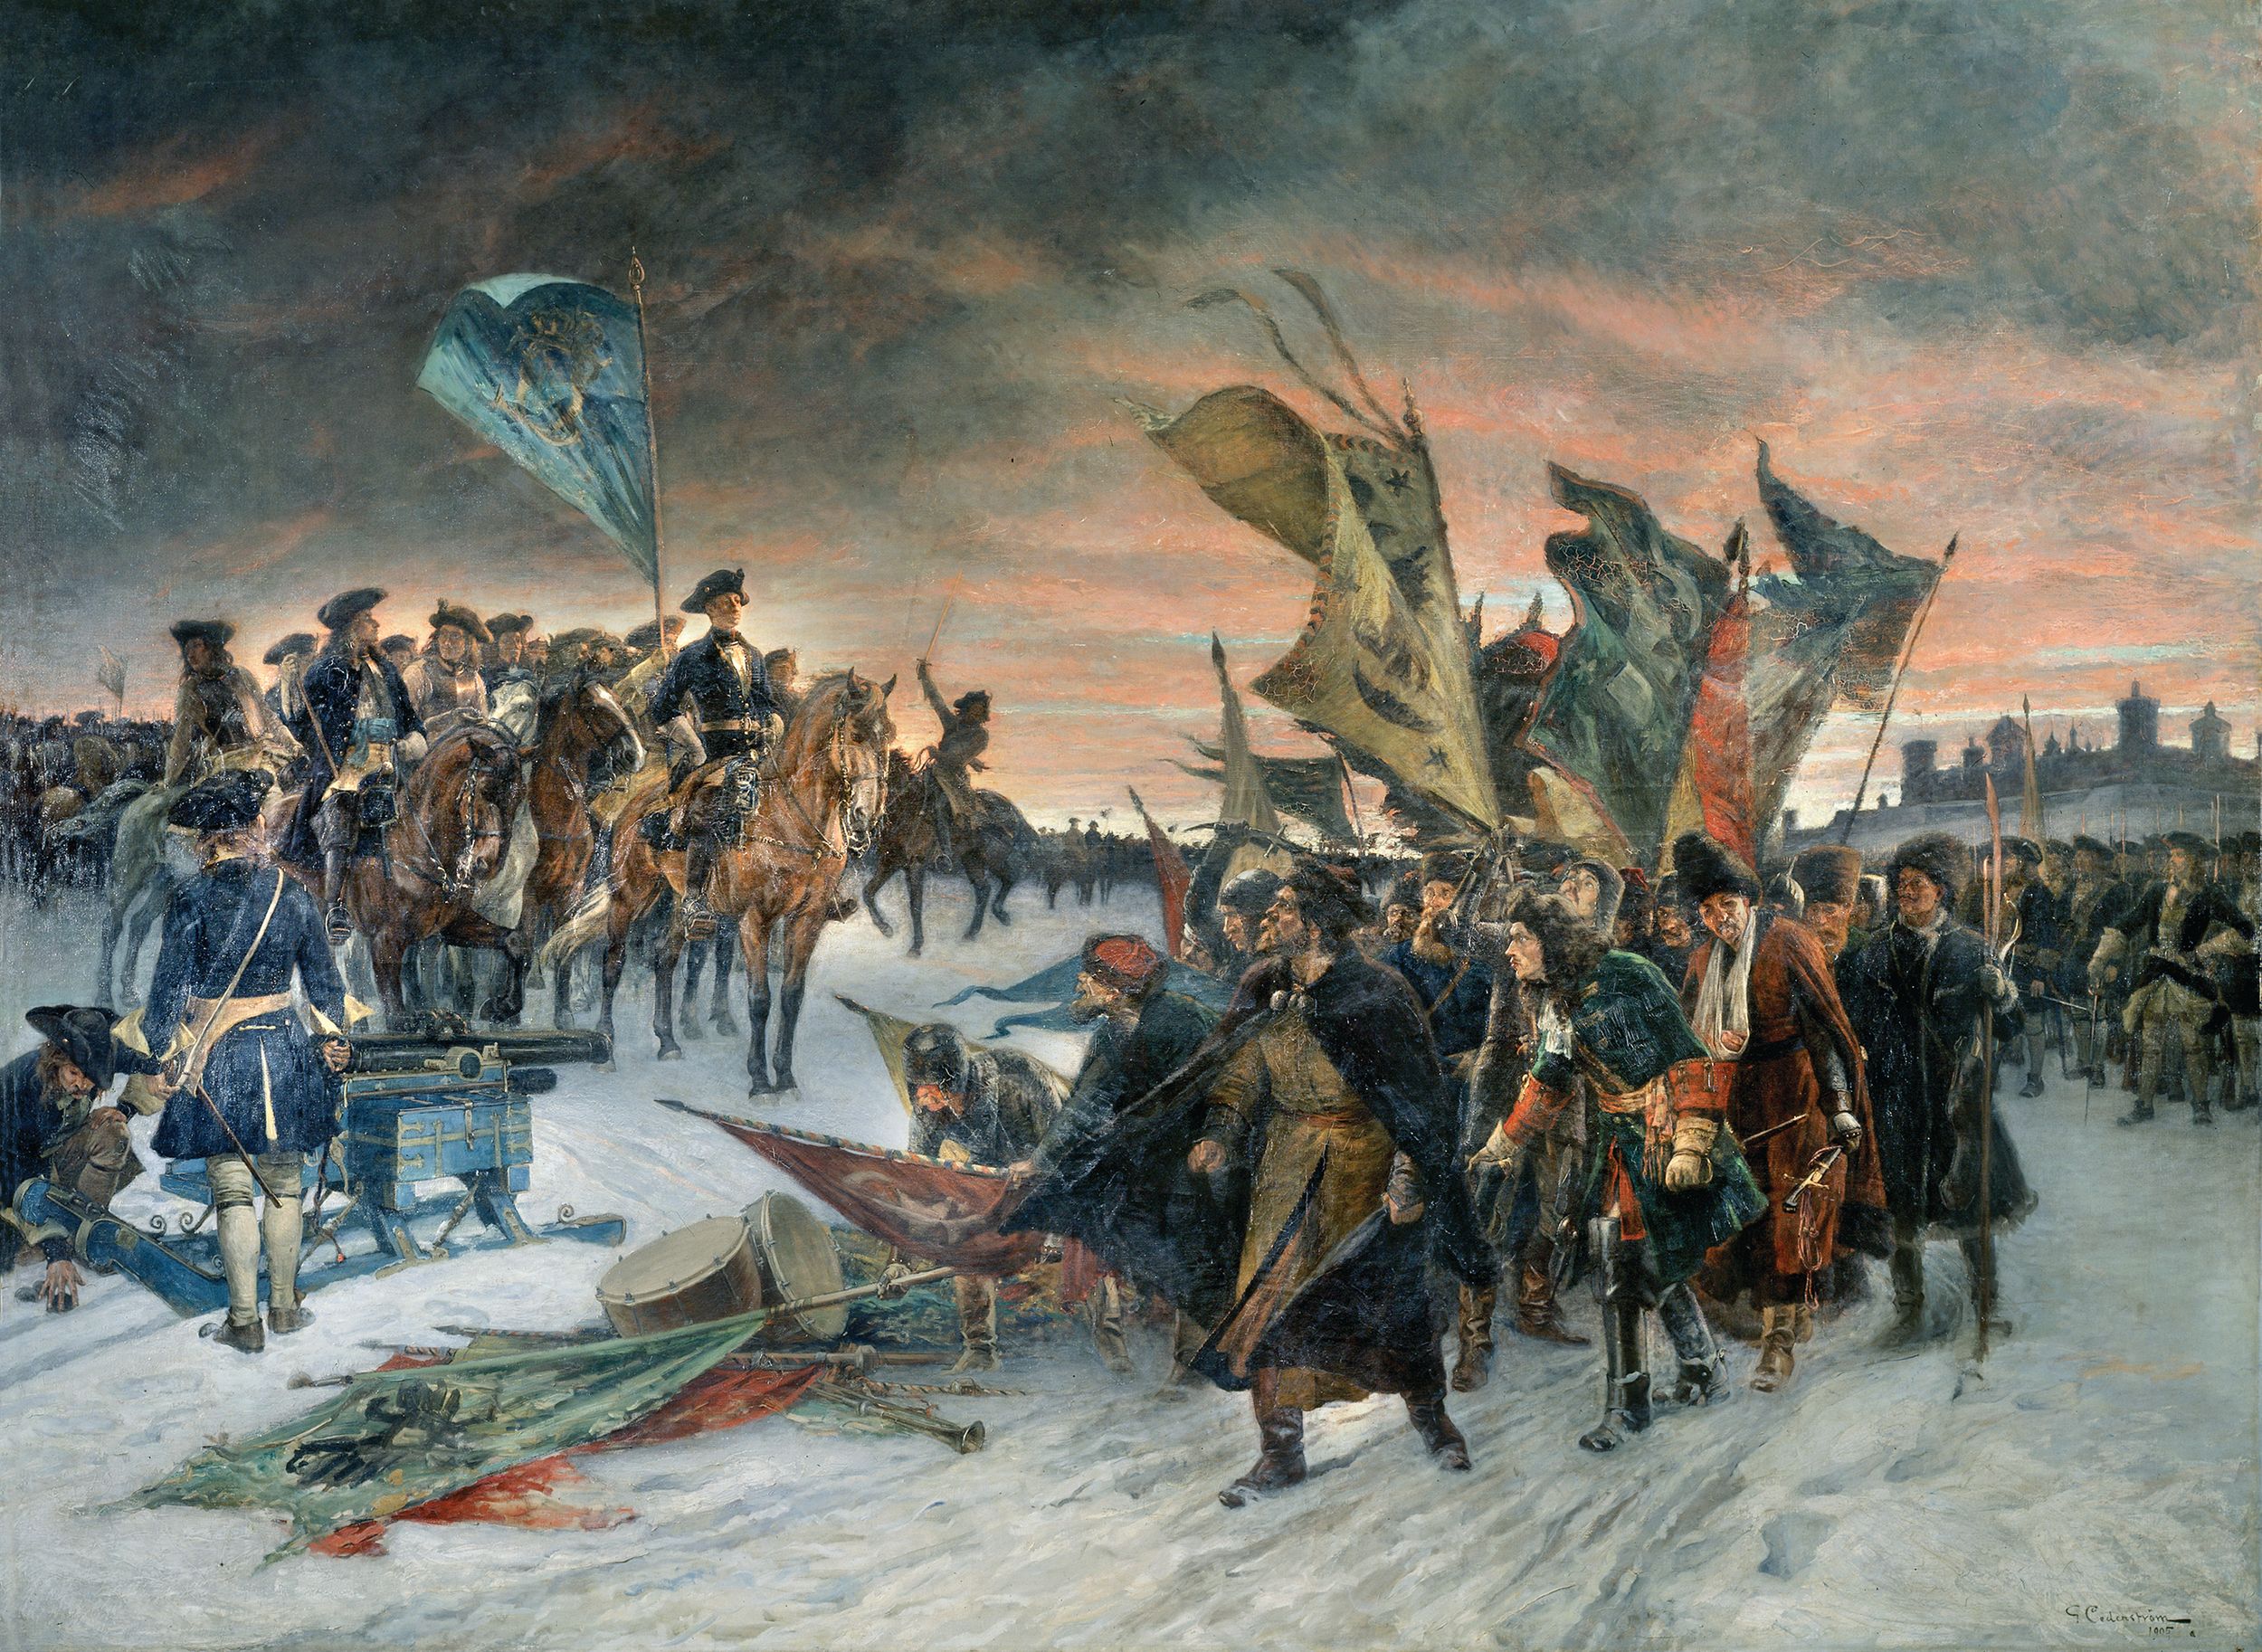 Charles XII watches as Russians under Peter I surrender their colors and salute the victor after the Battle of Narva in November 1700.